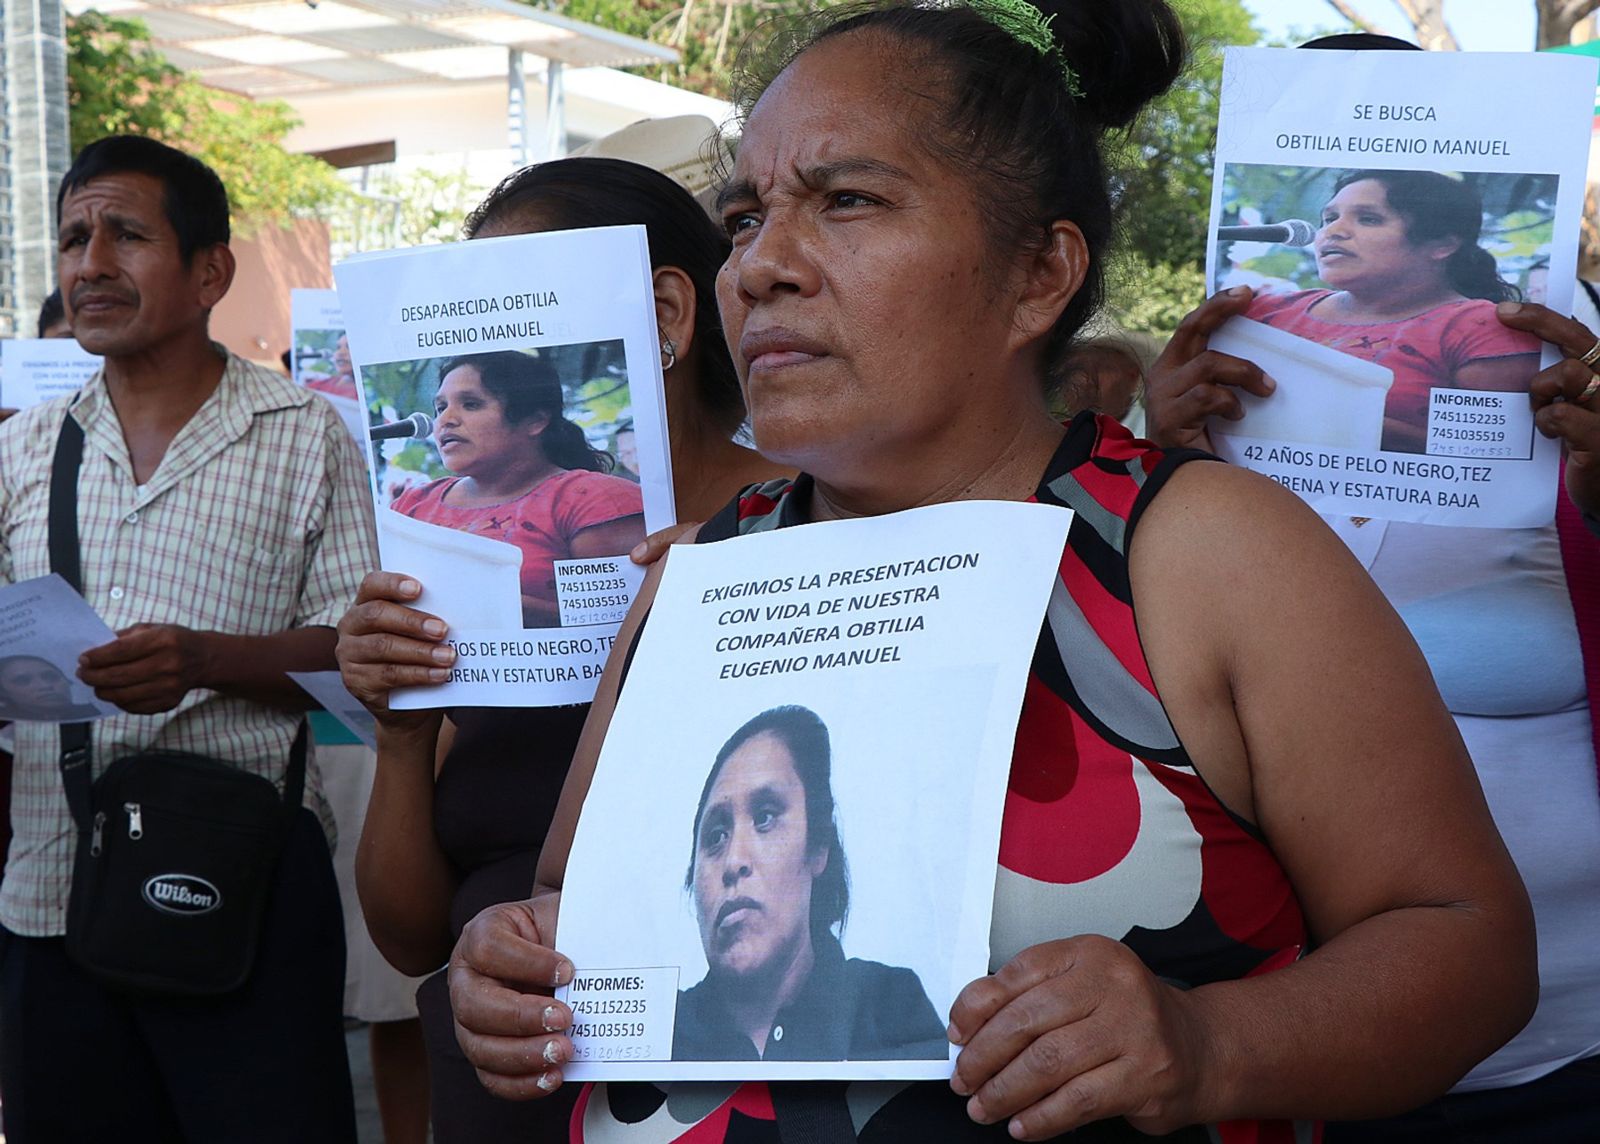 More than lack of capacity: active impunity in Mexico